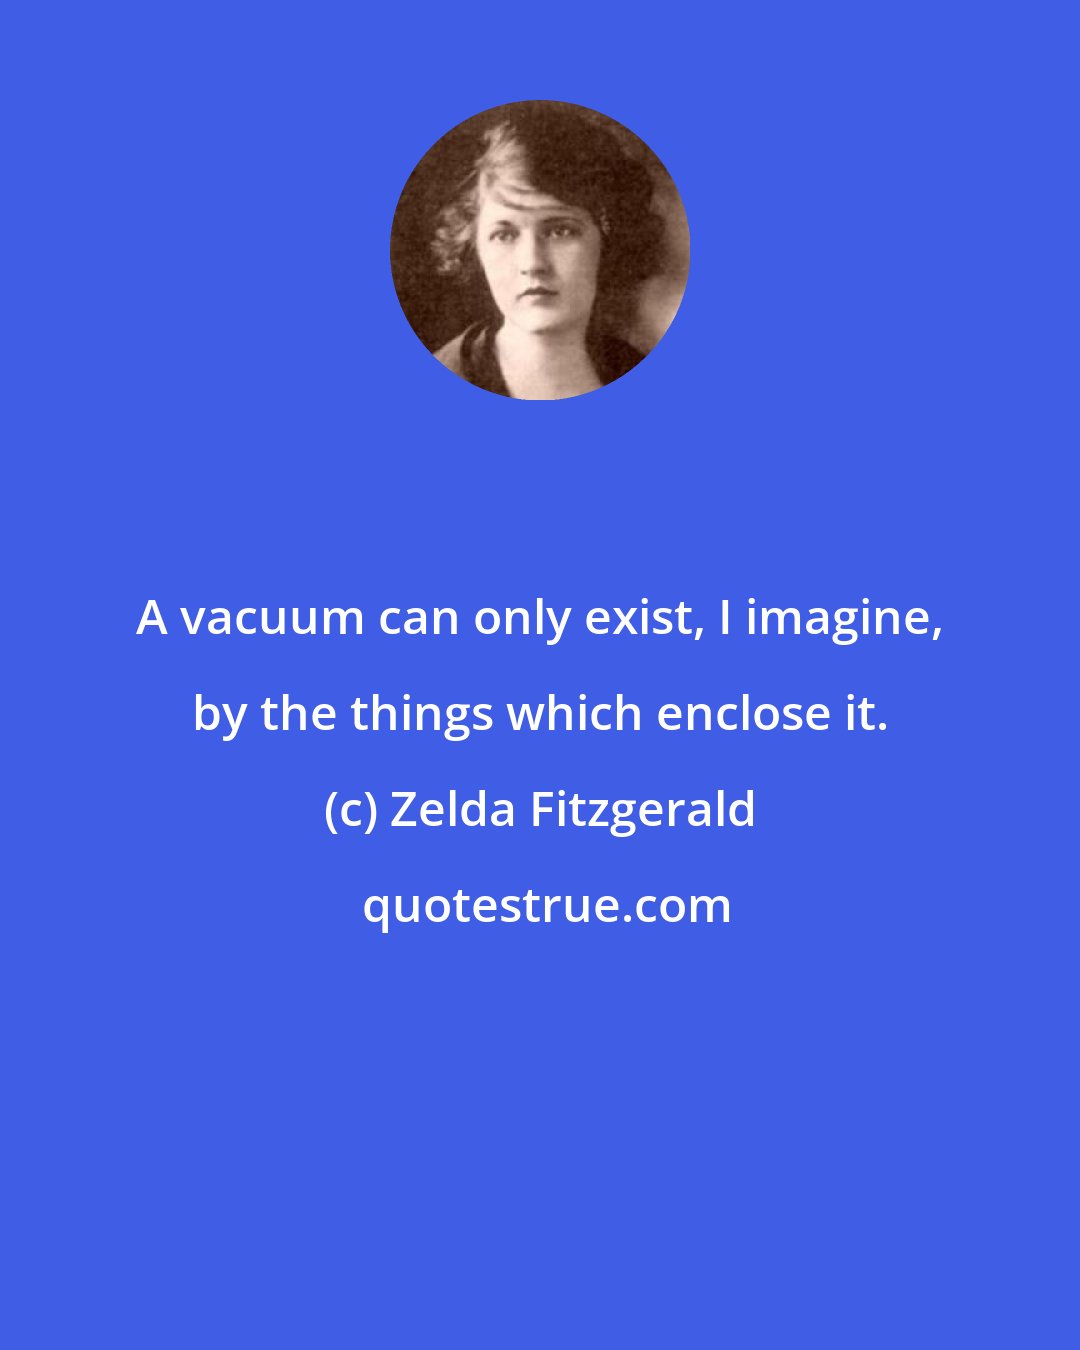 Zelda Fitzgerald: A vacuum can only exist, I imagine, by the things which enclose it.